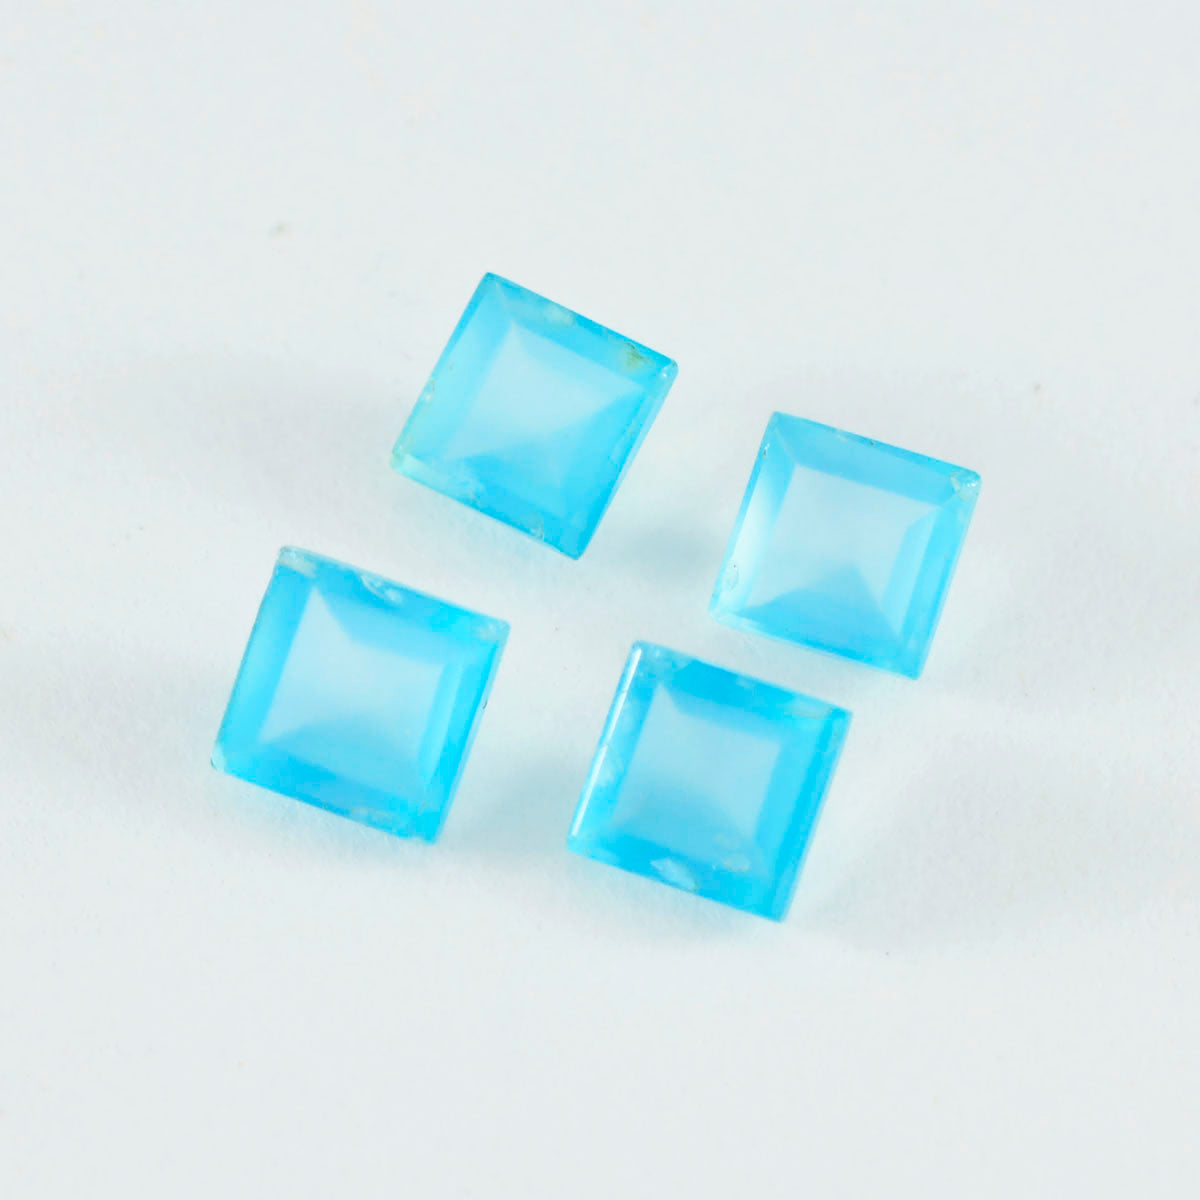 Riyogems 1PC Genuine Blue Chalcedony Faceted 6x6 mm Square Shape A+1 Quality Loose Gem